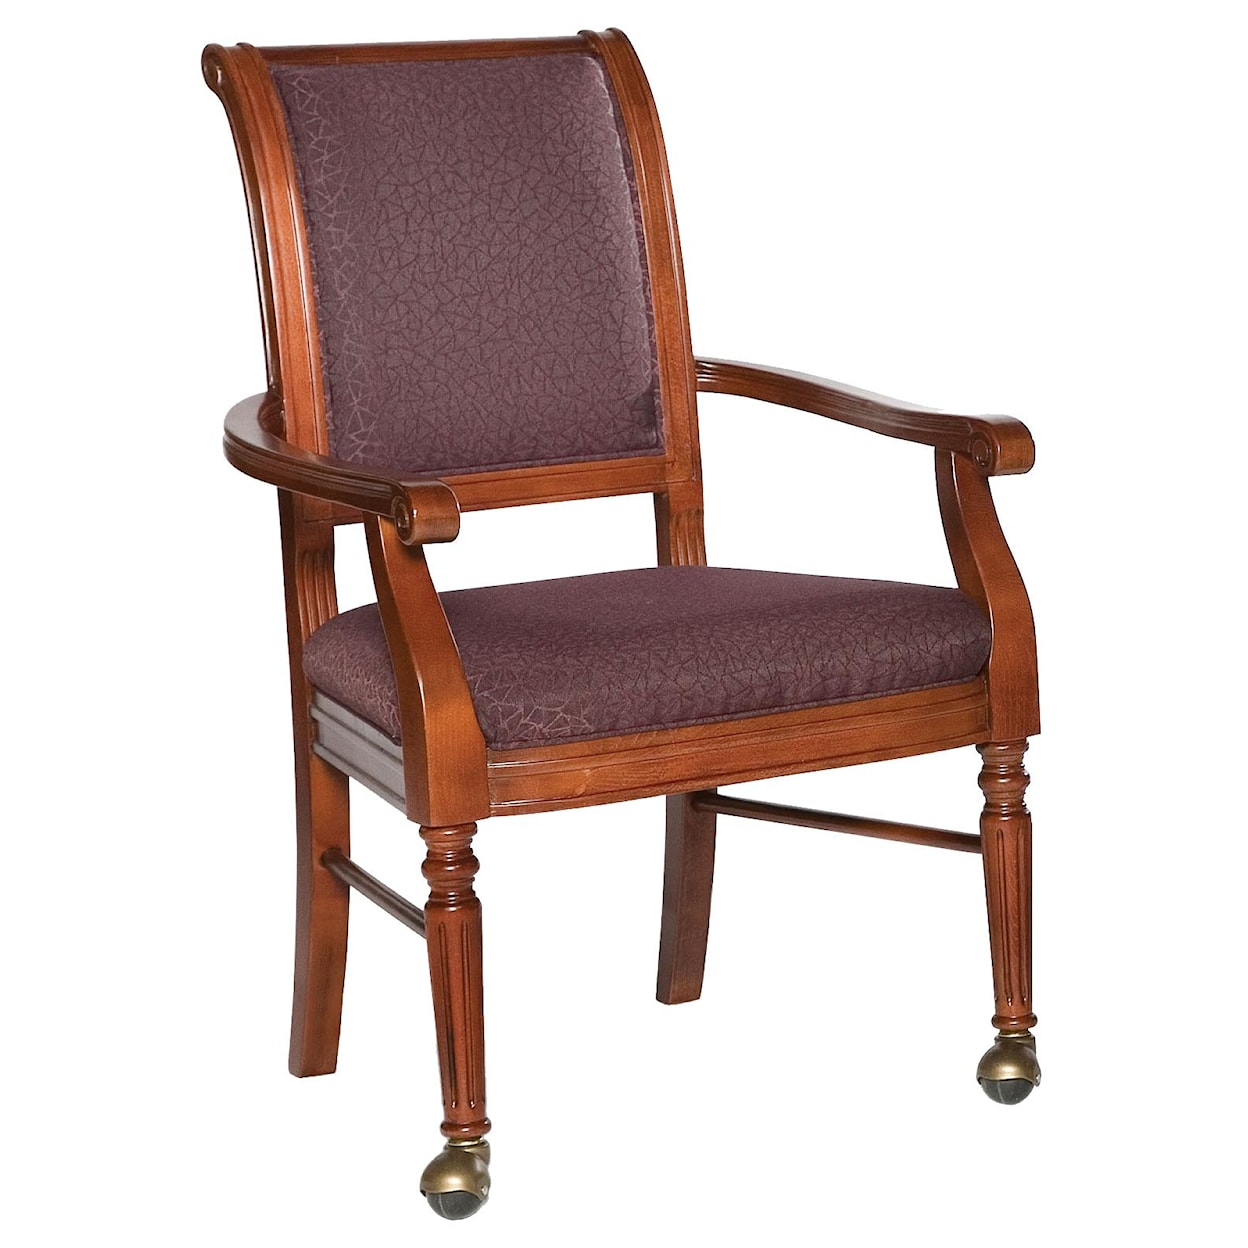 Fairfield Chairs Picture Frame Chair with Front Leg Casters